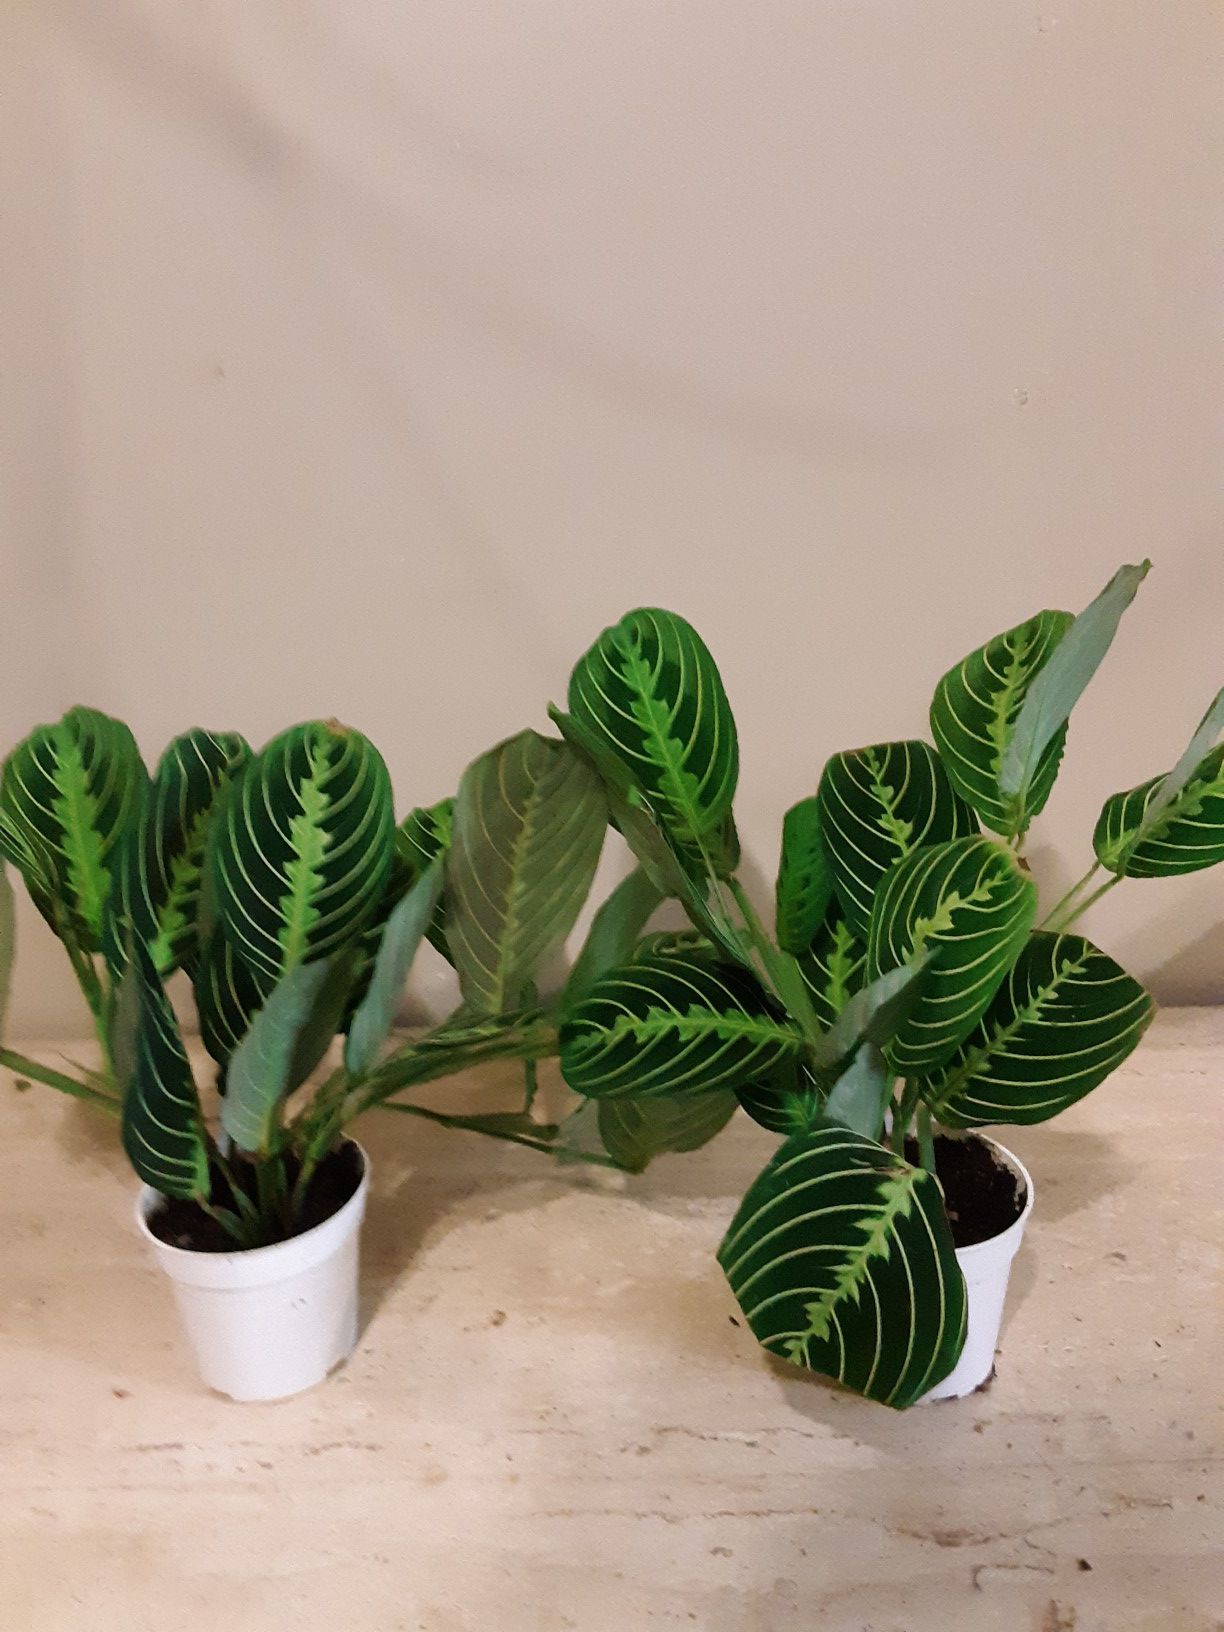 Prayer plants in 4 inches pot $8 each